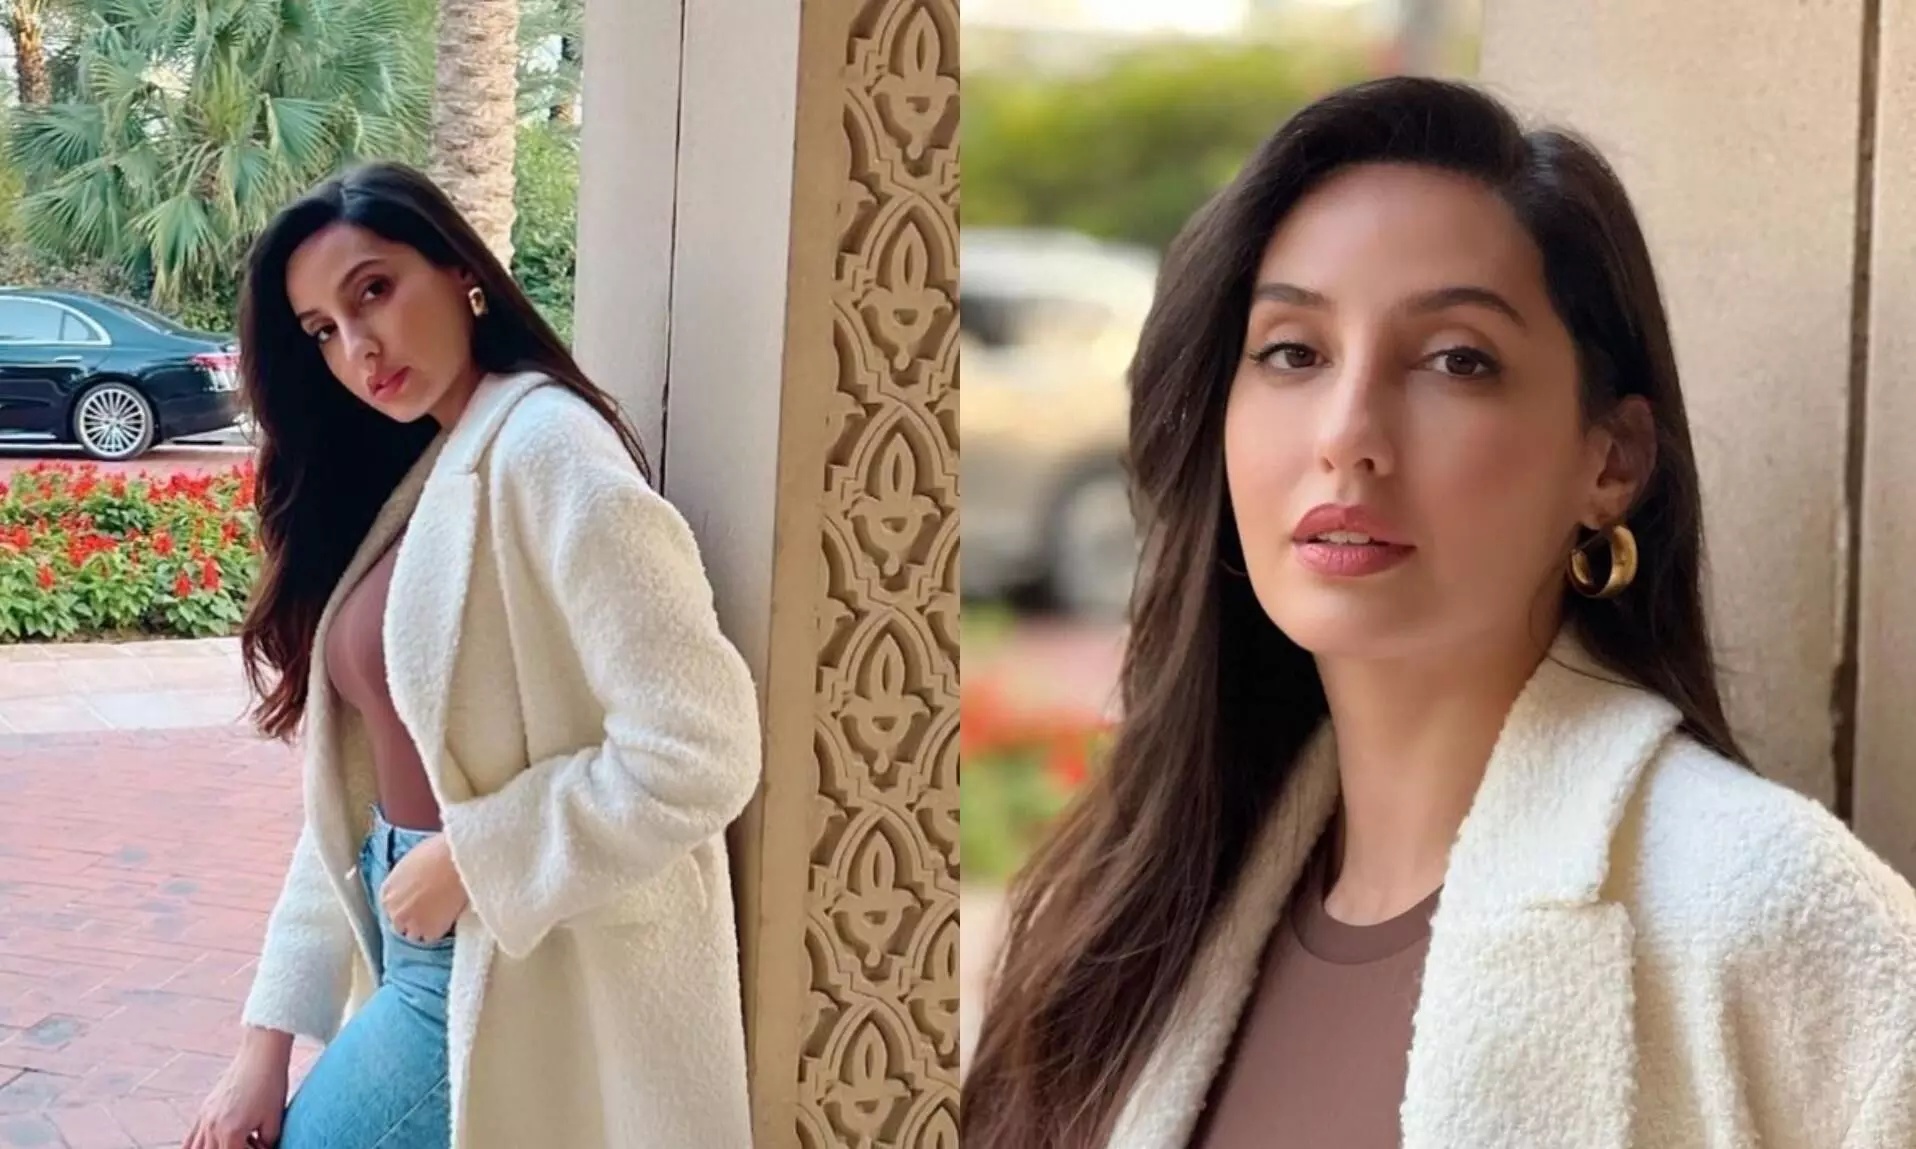 Nora Fatehi takes over Dubai in casual-chic outfit and Rs 3 lakhs bag